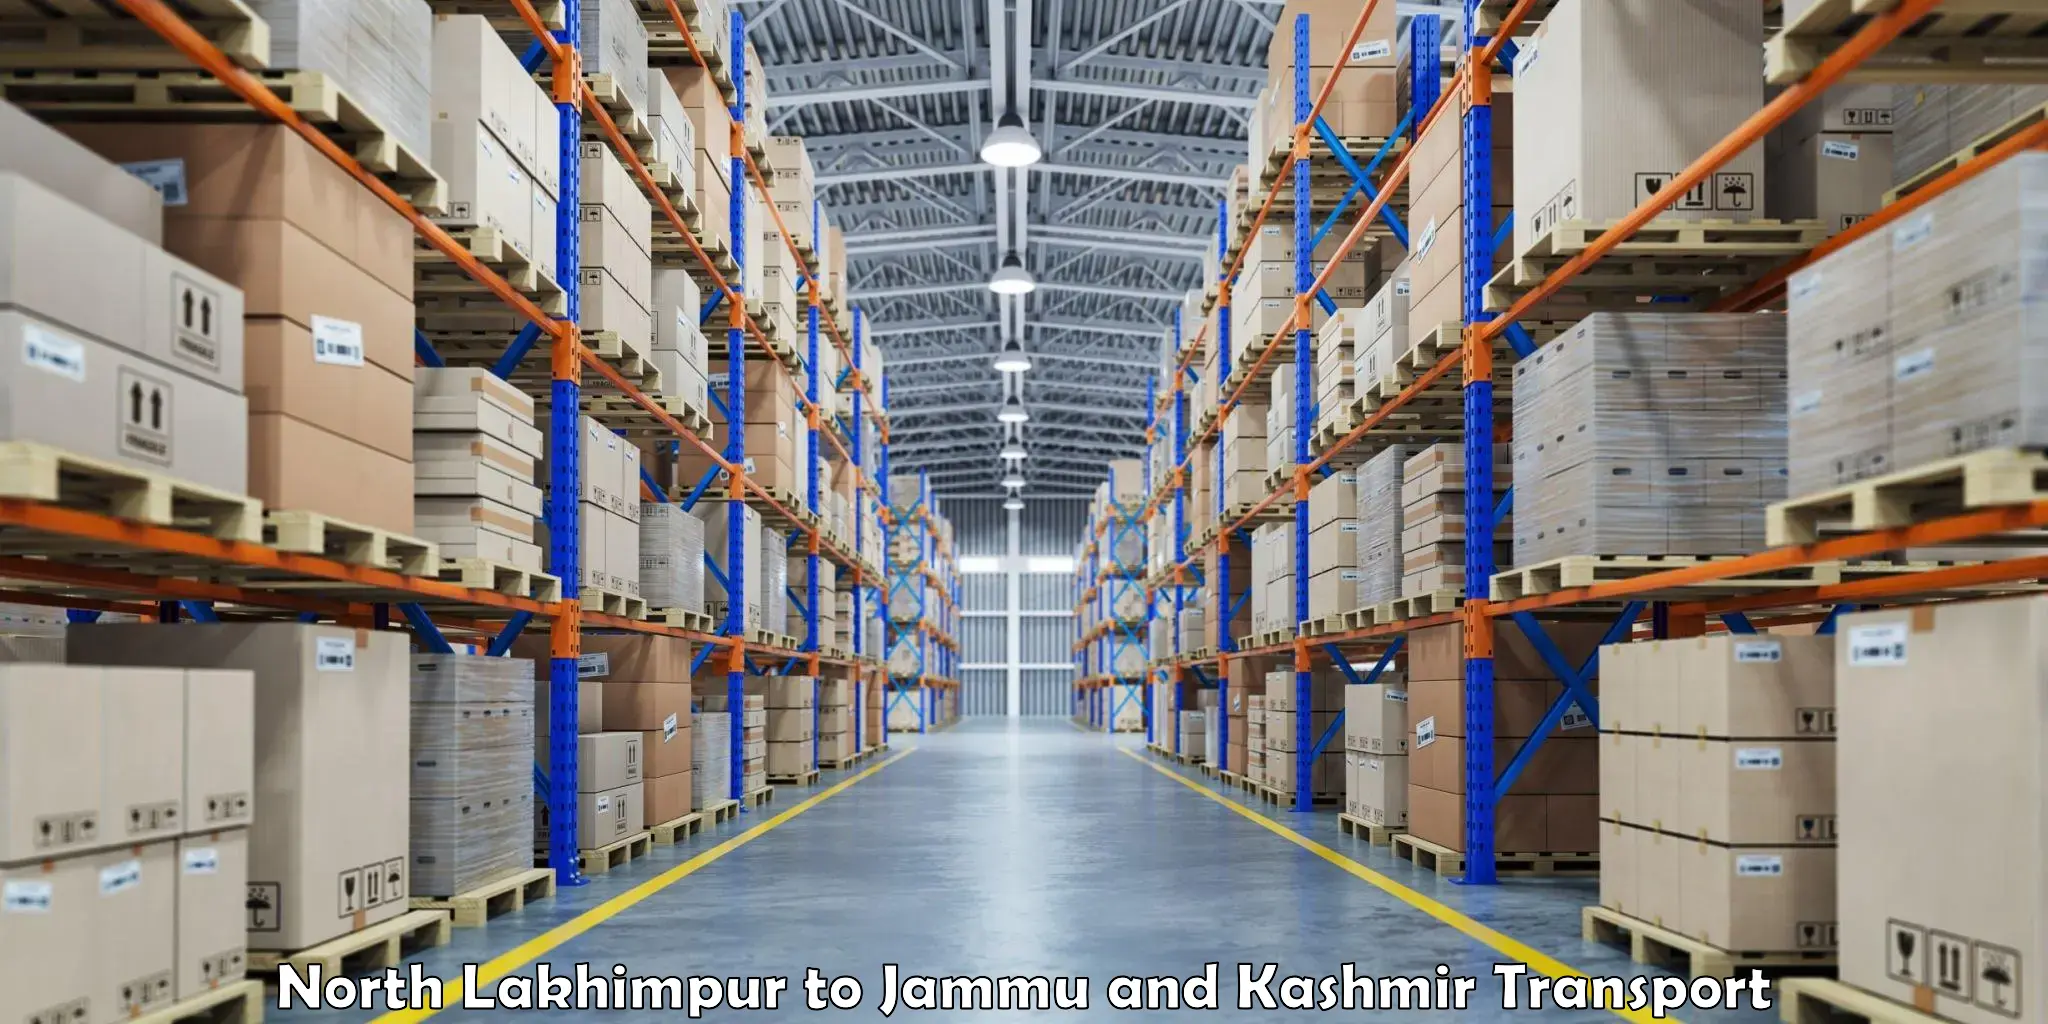 Container transport service North Lakhimpur to Udhampur